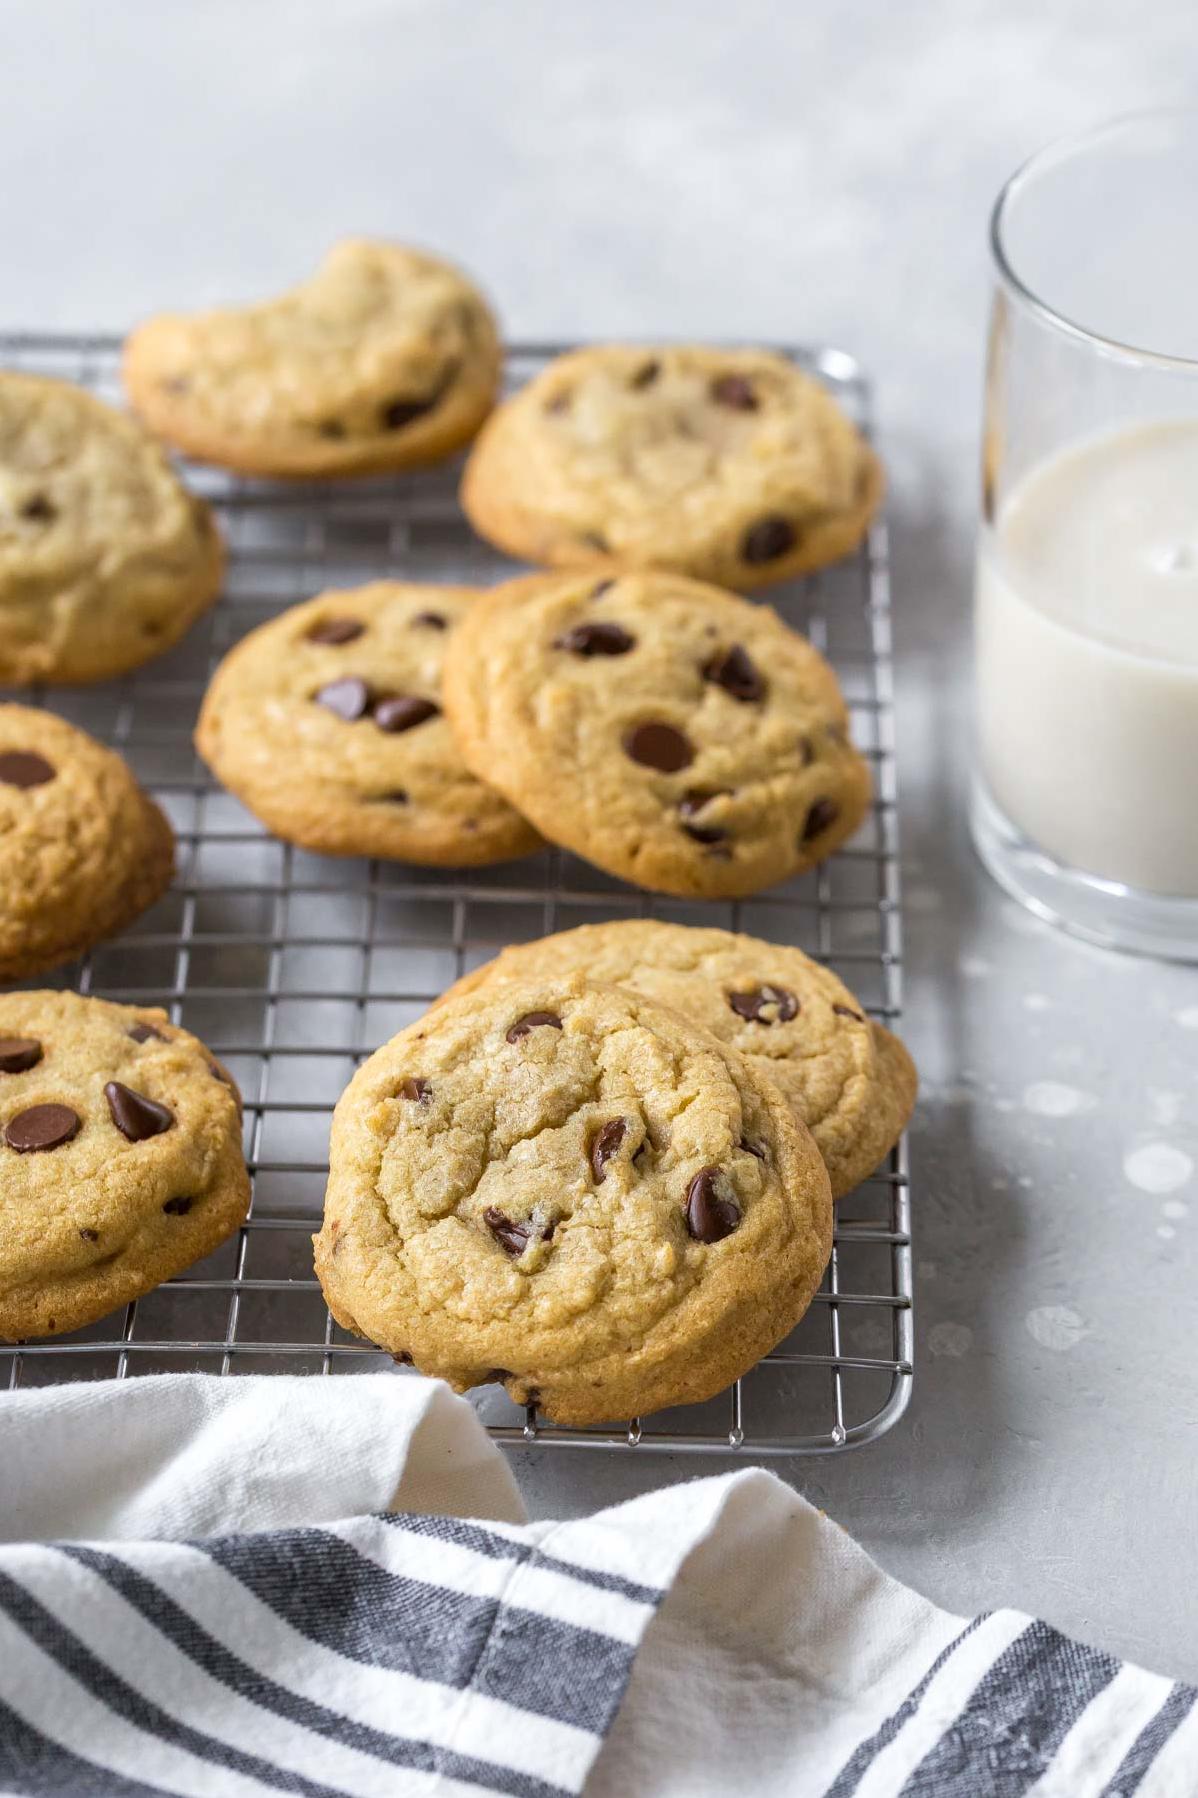  Taking a bite of these dairy-free chocolate chip cookies feels like a warm hug on a cold winter day.